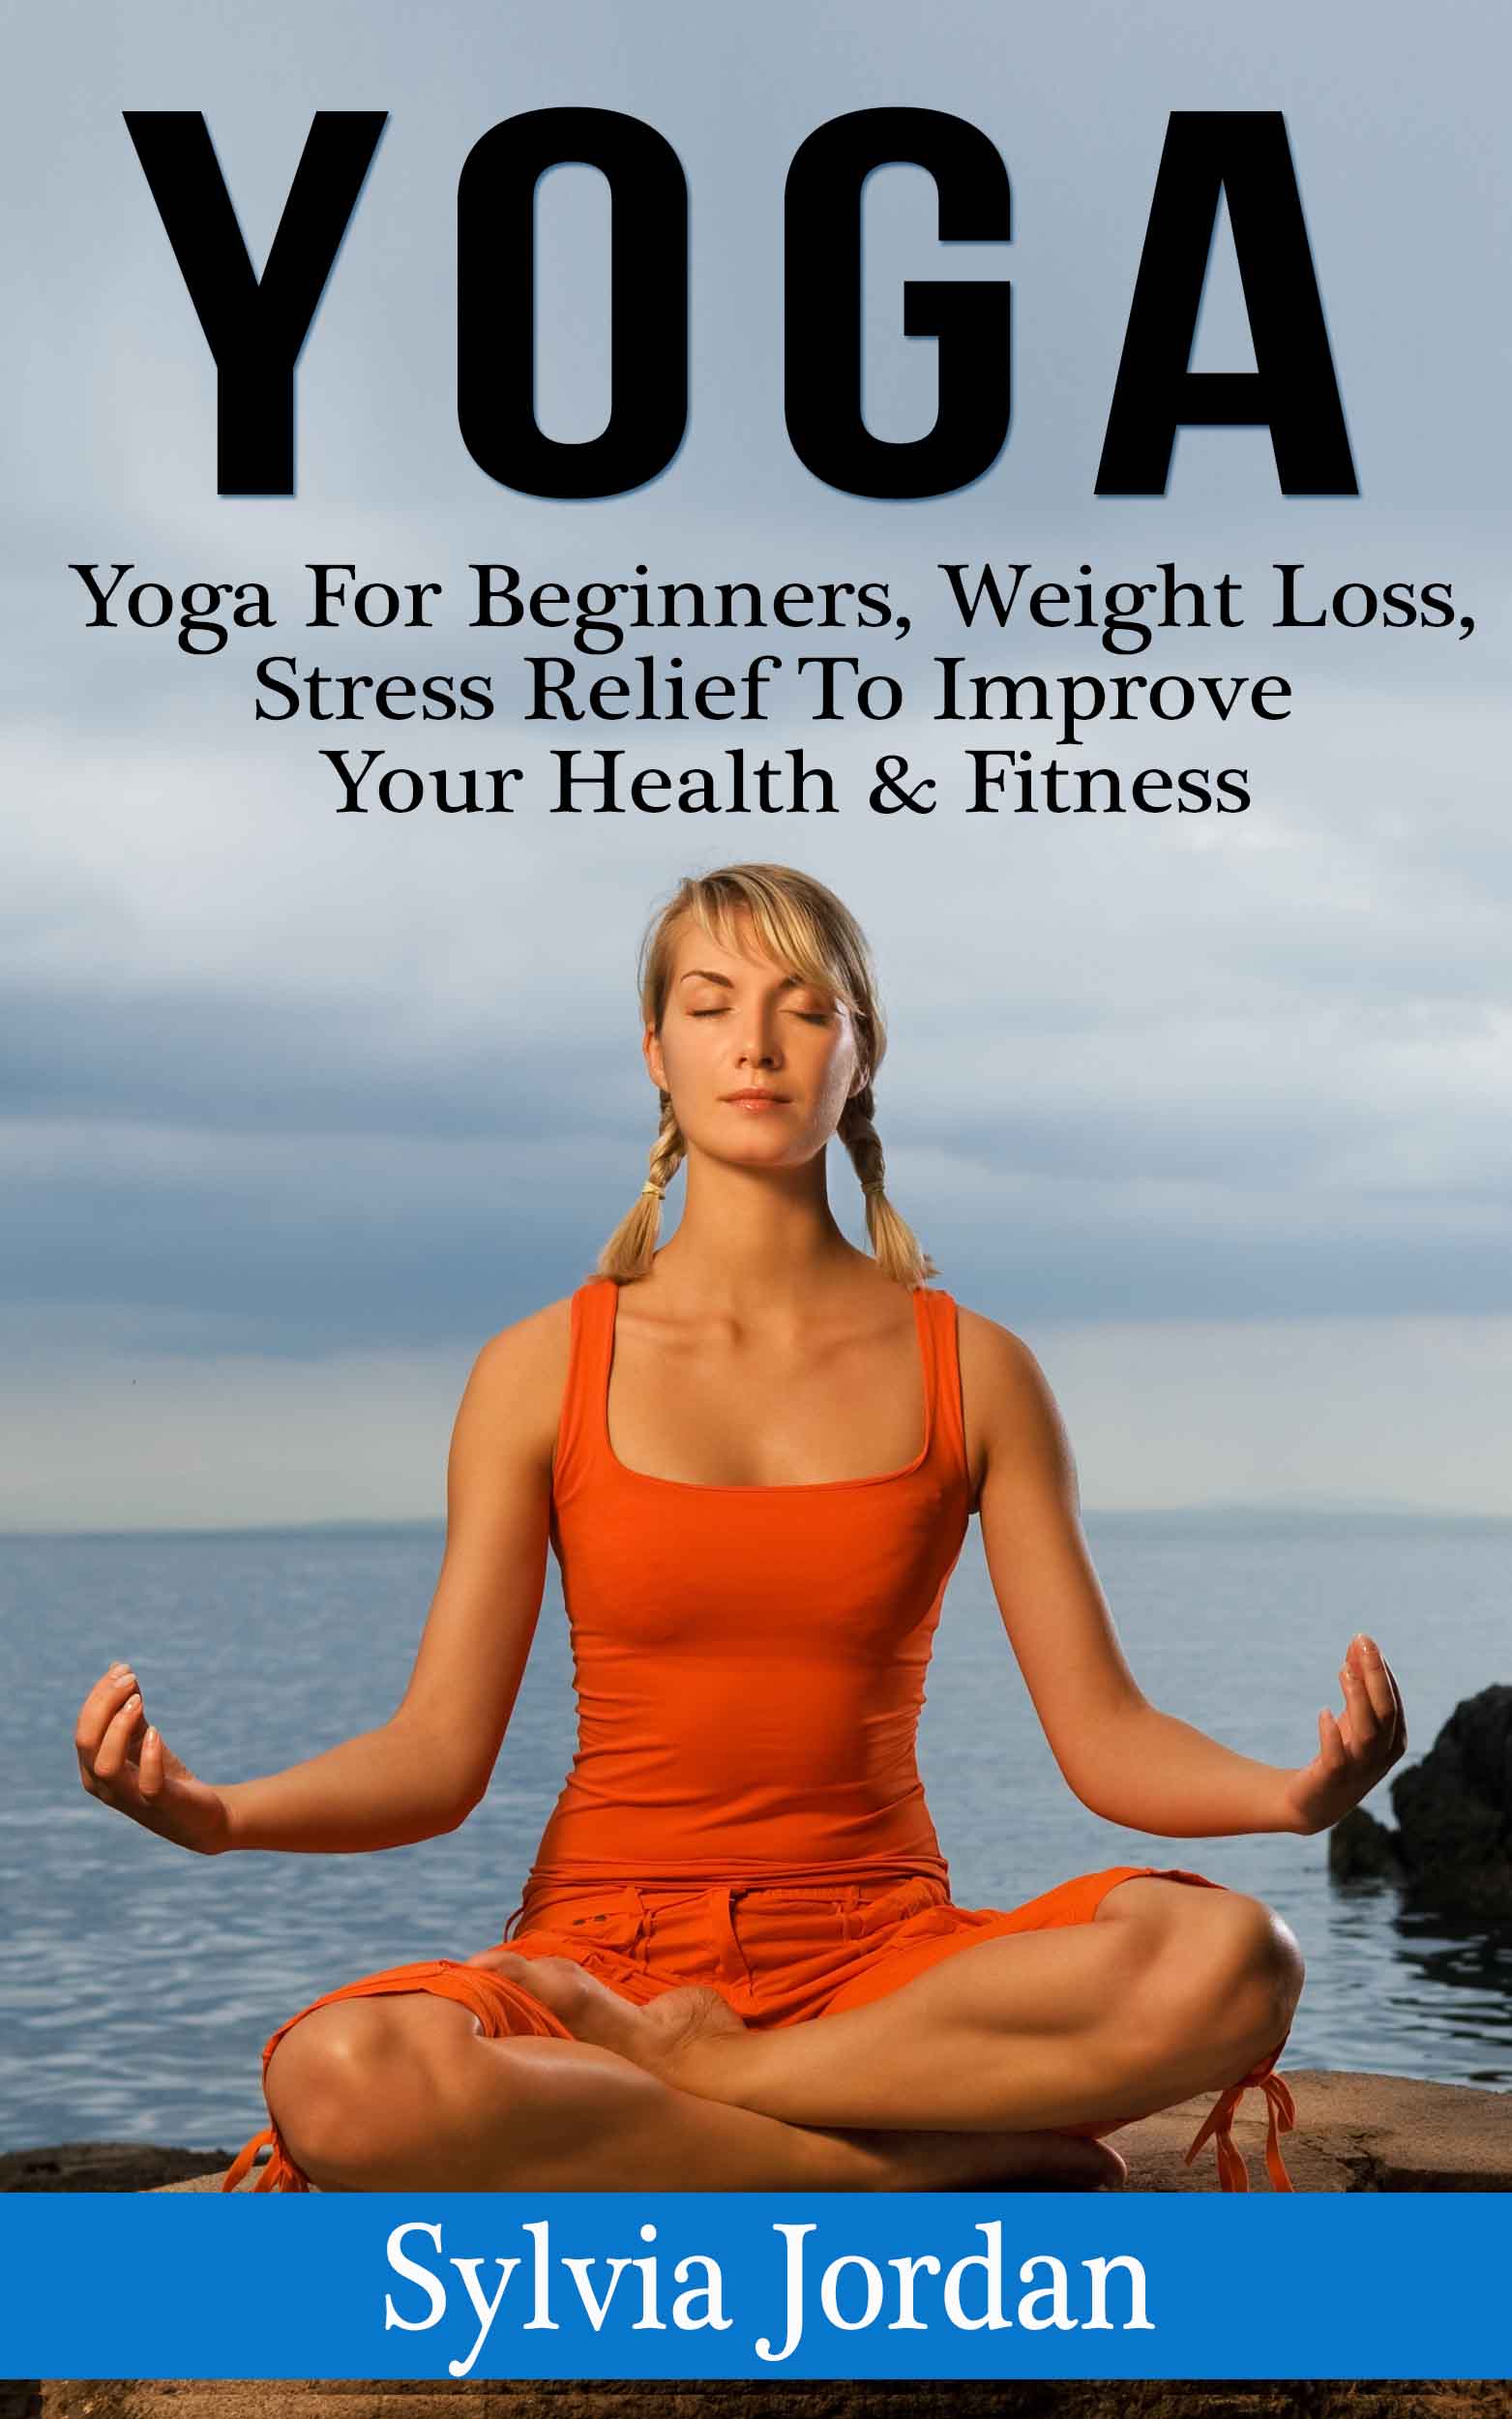 FREE: Yoga: Yoga For Beginners- Weight Loss, Stress Relief to Improve Your Health & Fitness by Sylvia Jordan